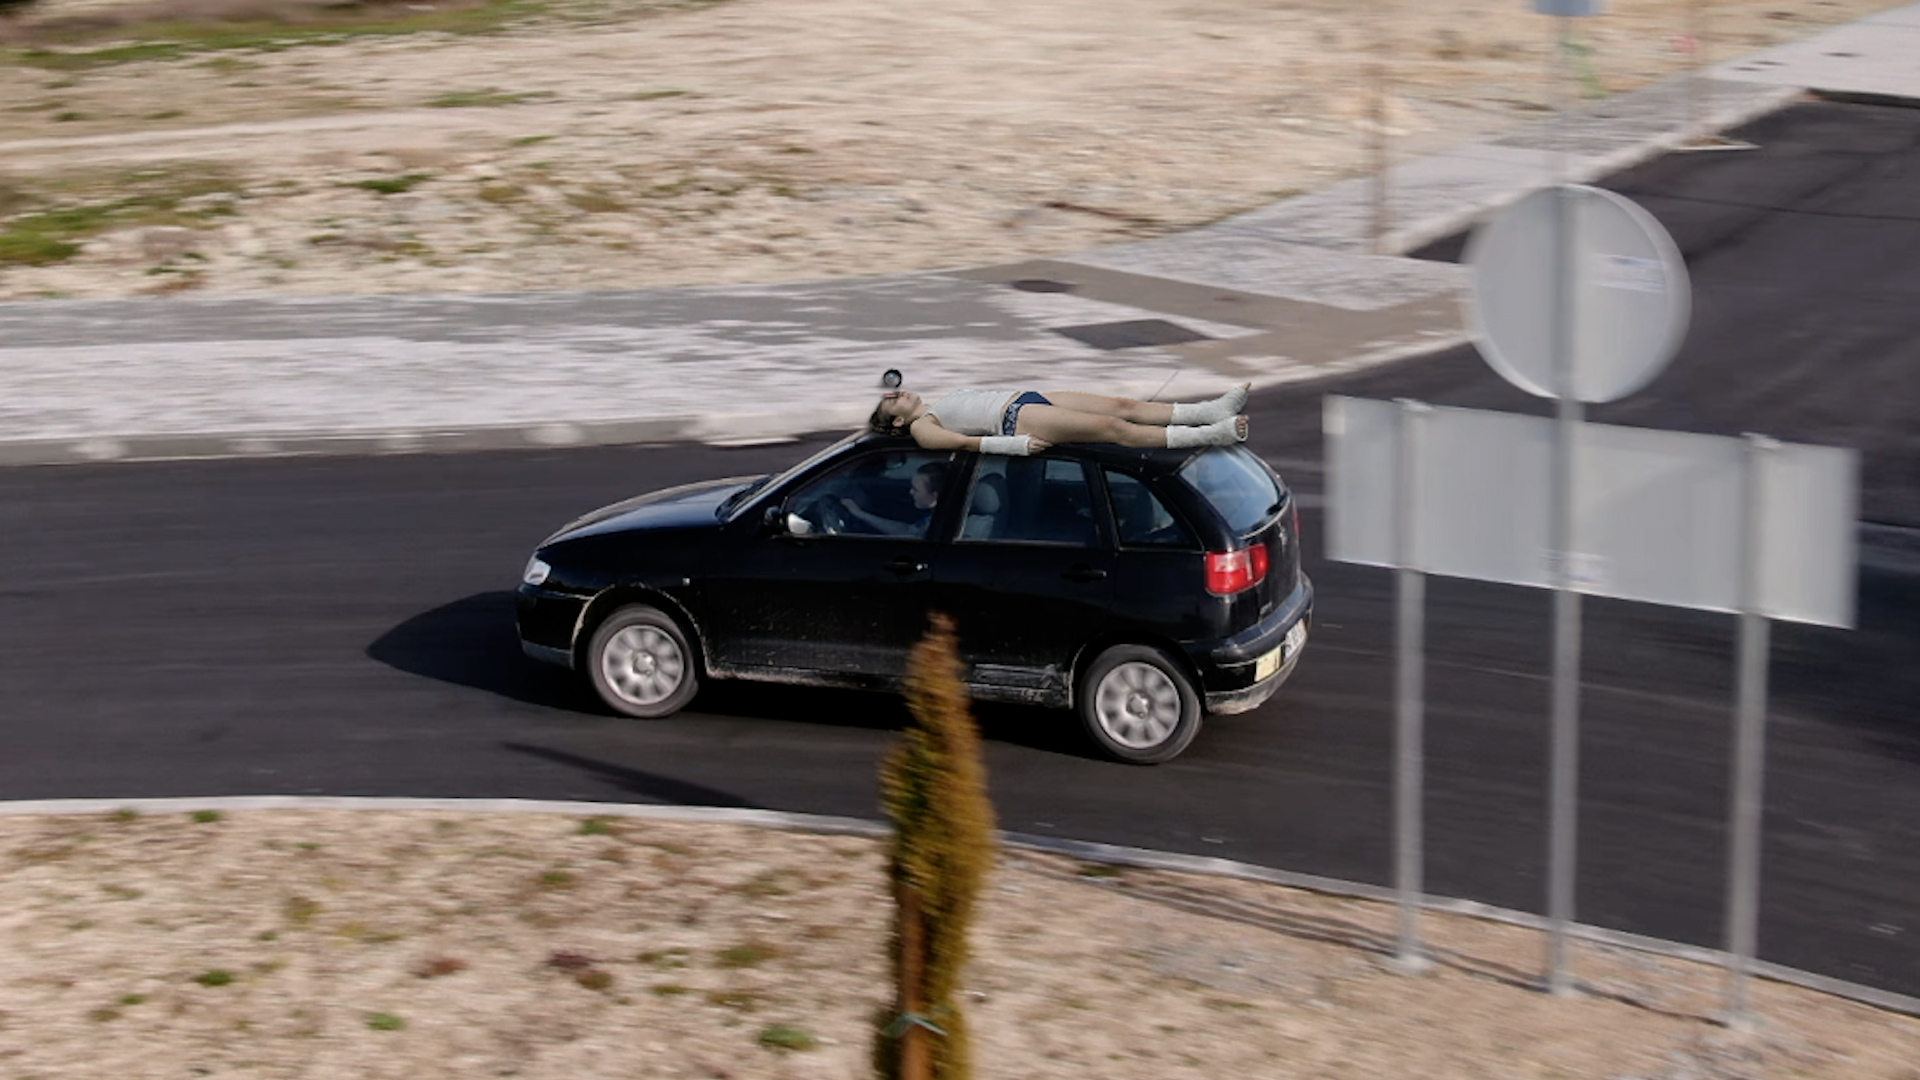 A shot of a car driving with a person laying on their back on the top of the vehicle.